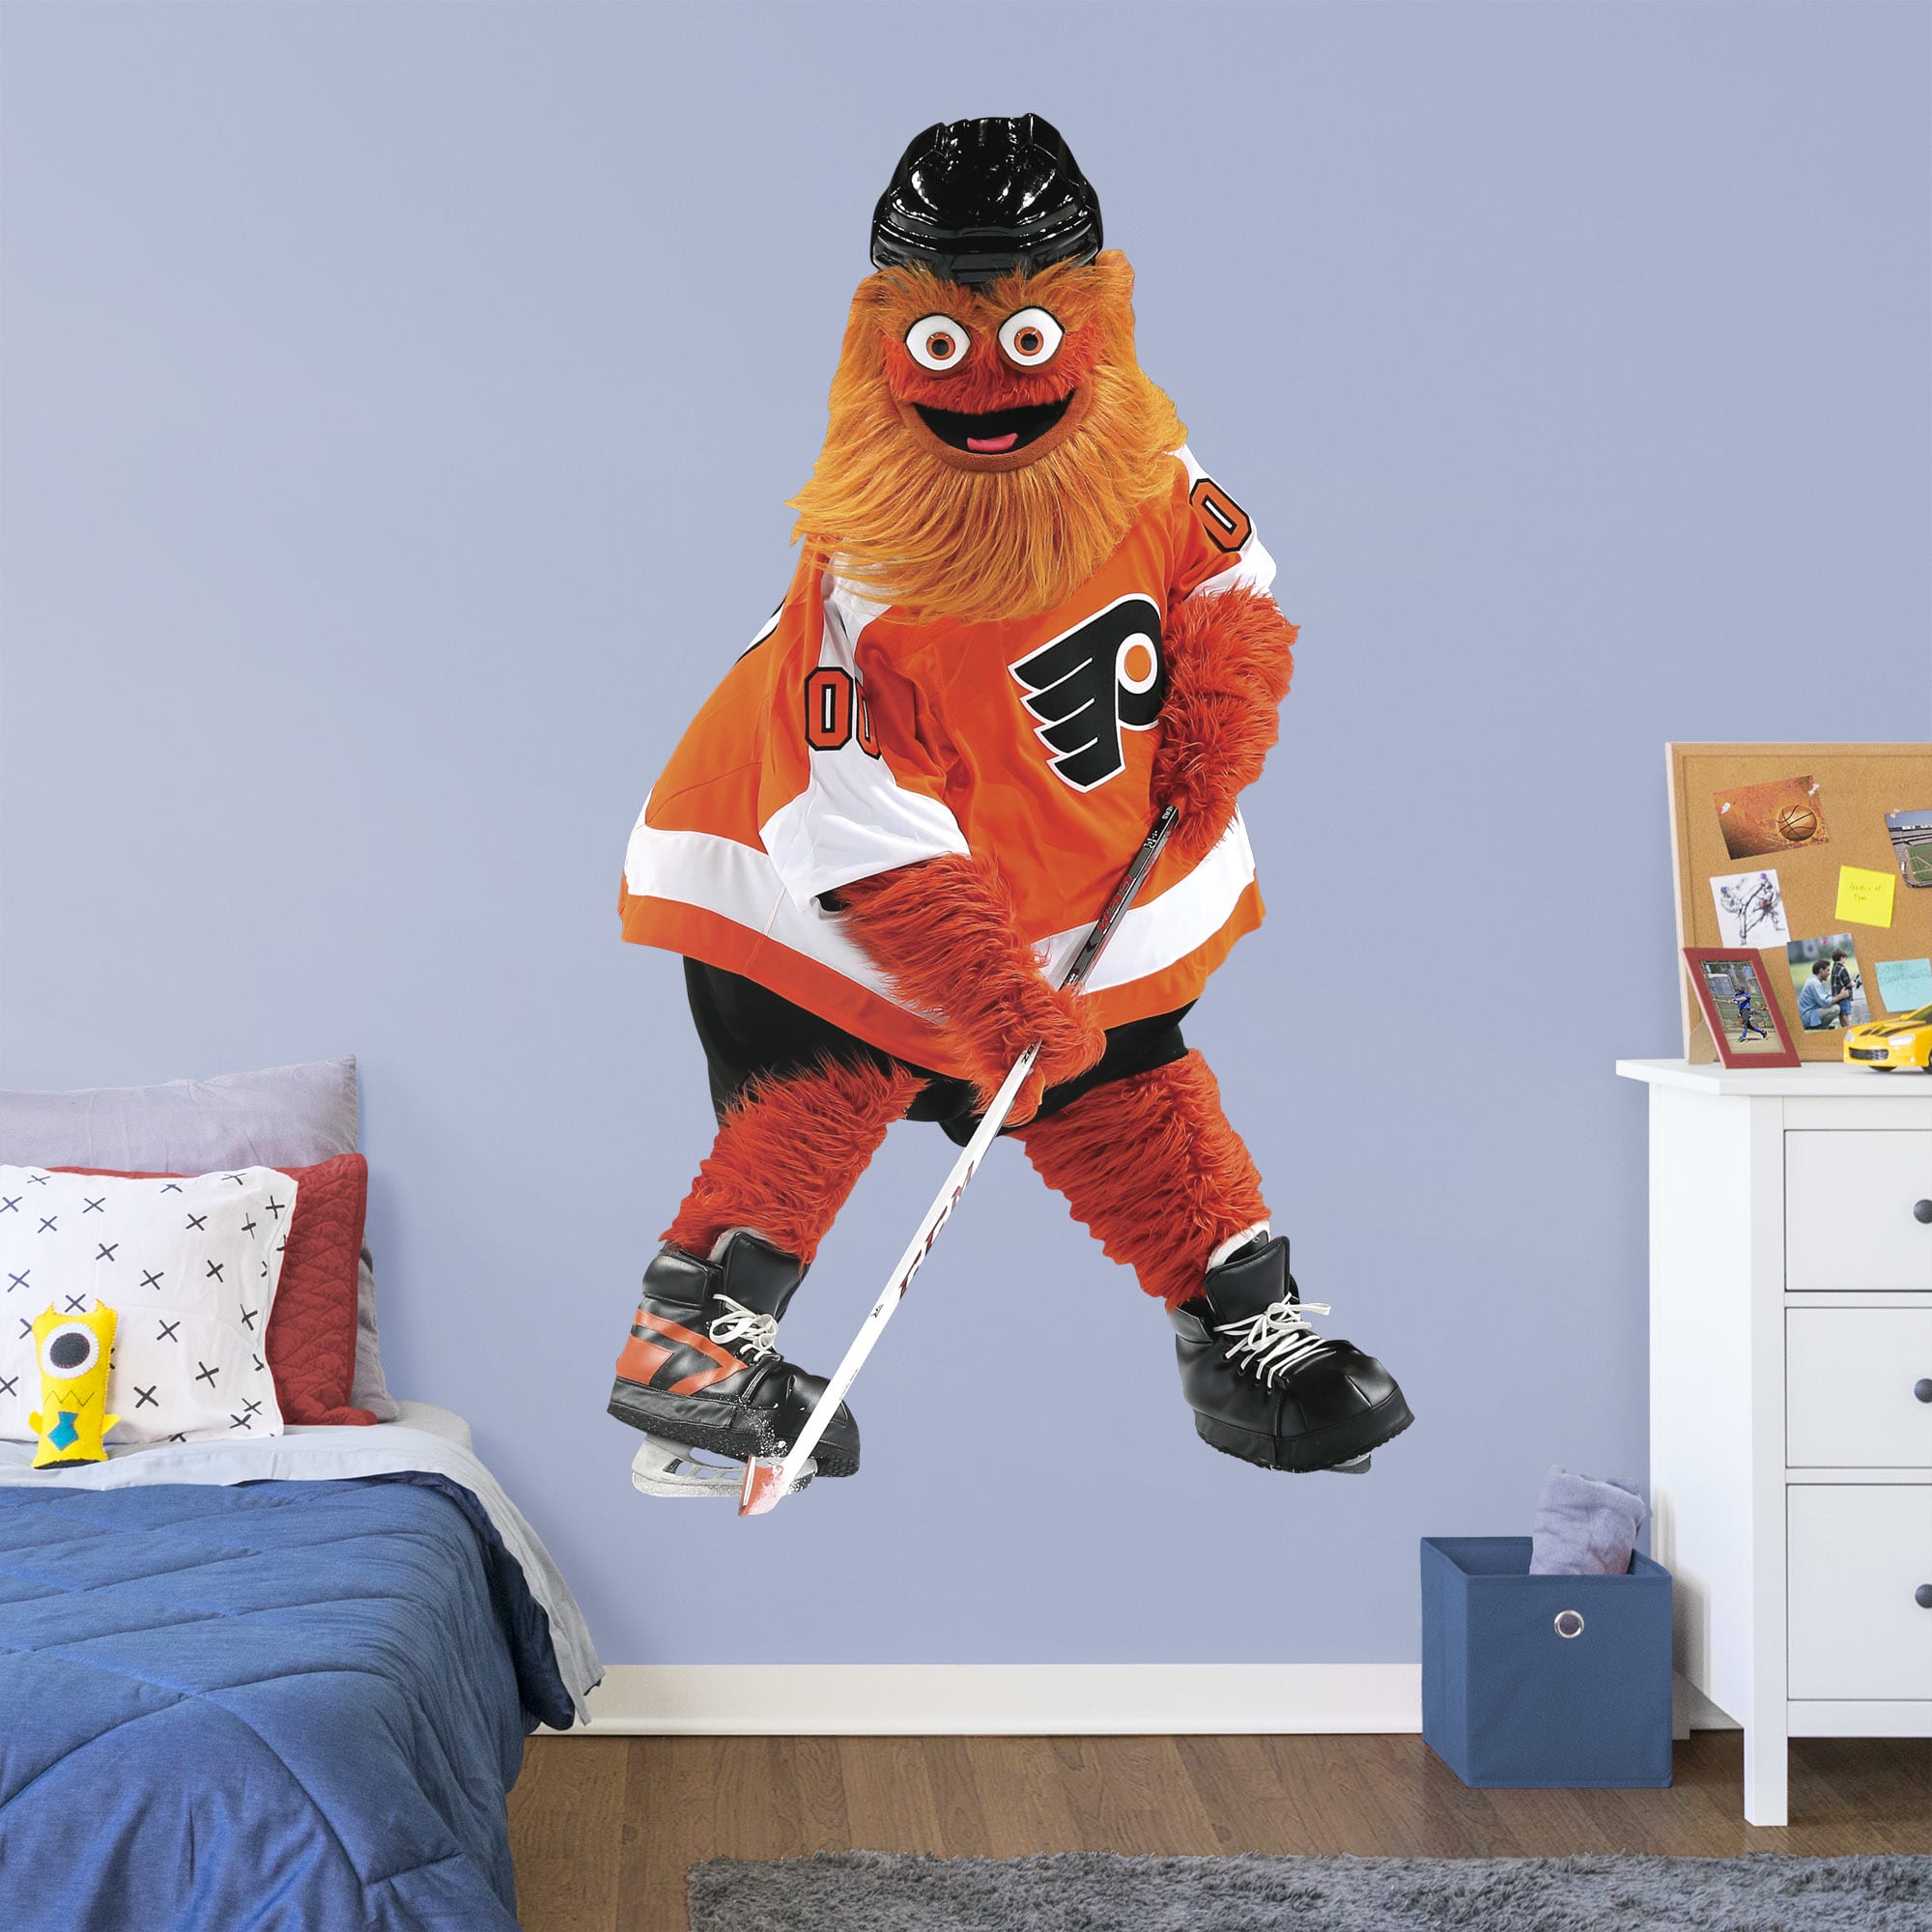 Philadelphia Flyers: Gritty Mascot - NHL Removable Wall Decal Giant Mascot + 2 Team Wall Decals